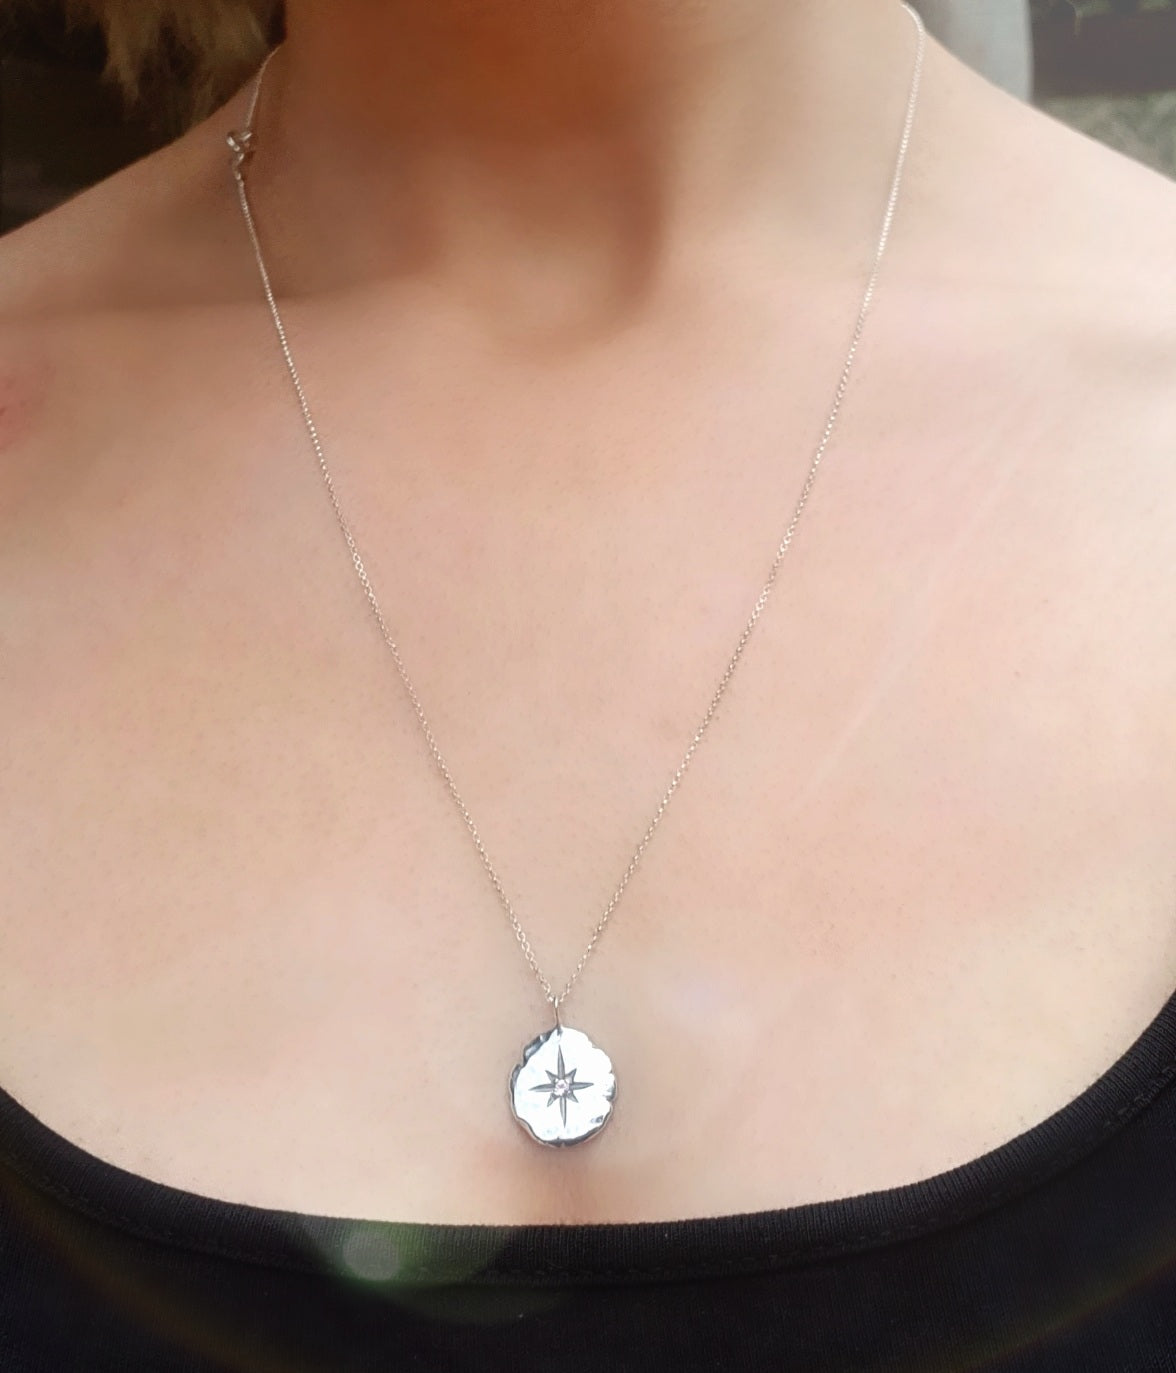 You are my North - Sterling silver blue sapphire necklace